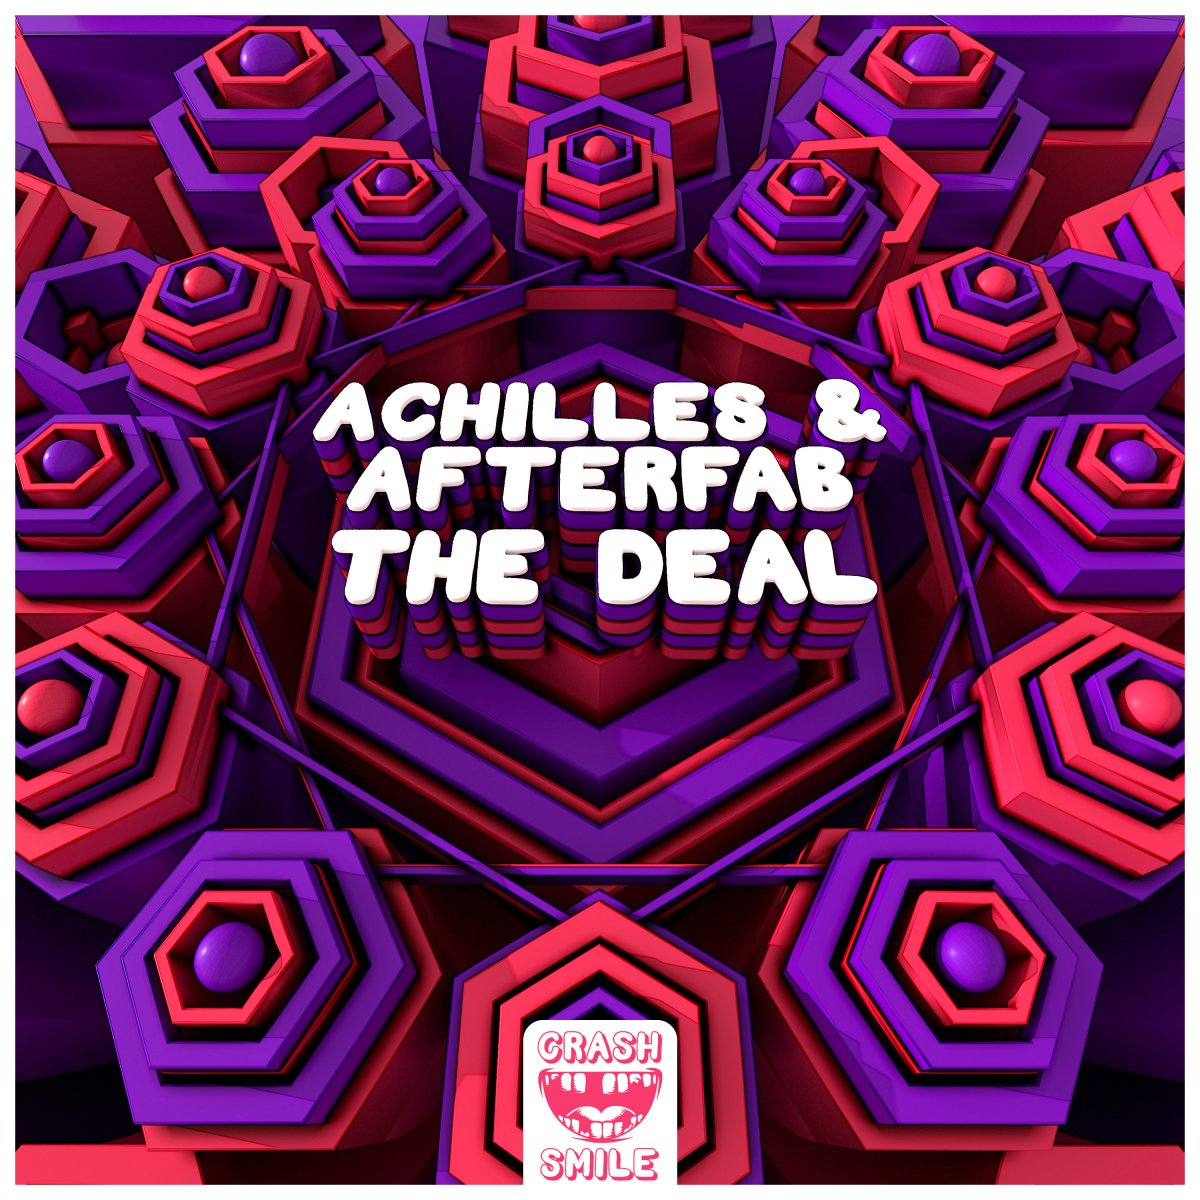 The Deal - Achilles⁠ & Afterfab⁠ 